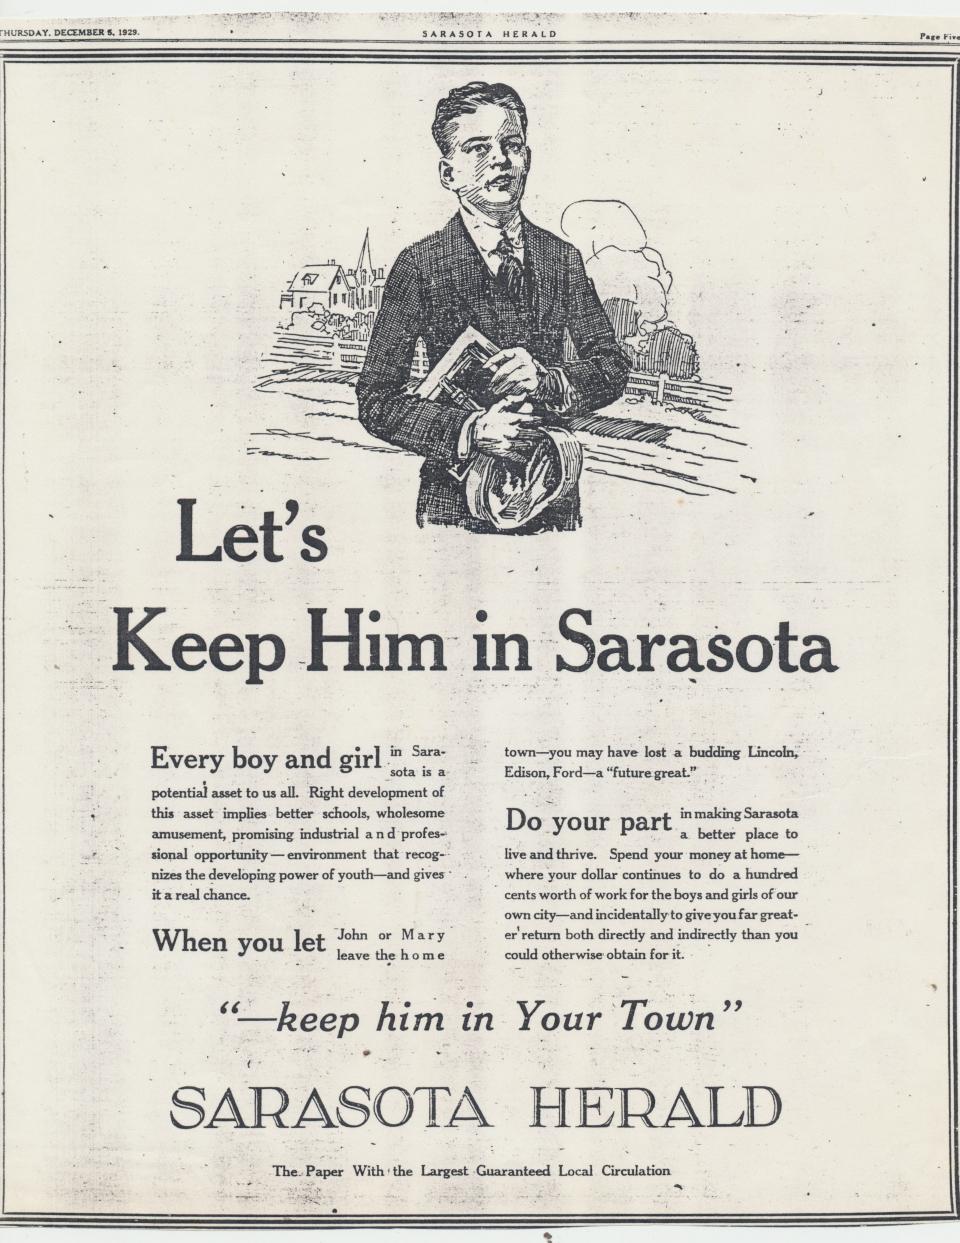 An ad during the Great Depression reflected the hard times.